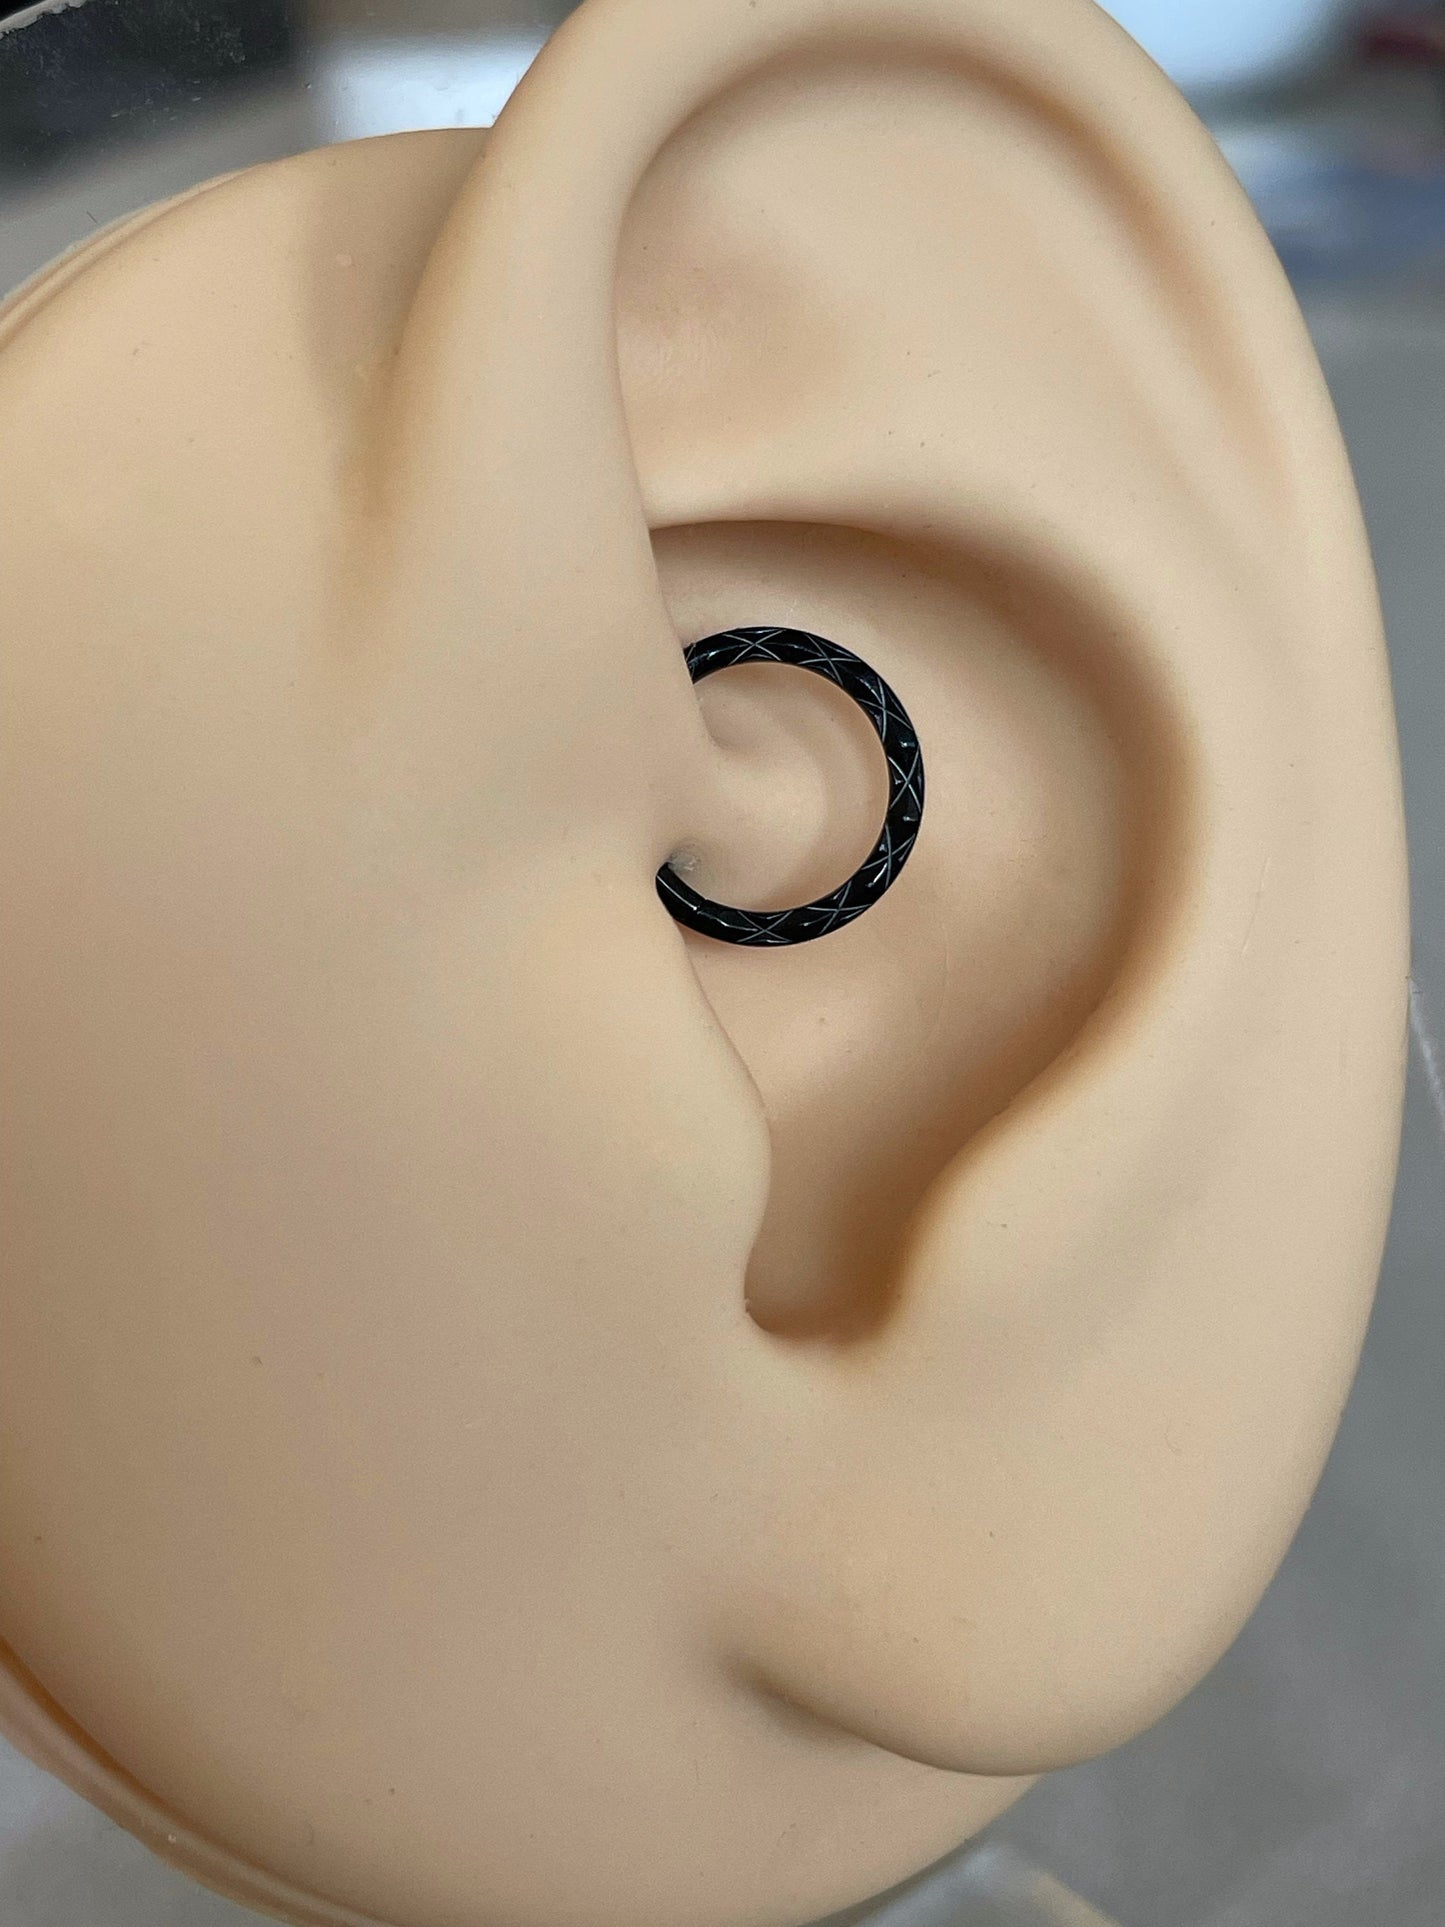 Black Daith Earring (16G | 6mm, 8mm or 10mm | Surgical Steel | Black, Gold, or Silver | 